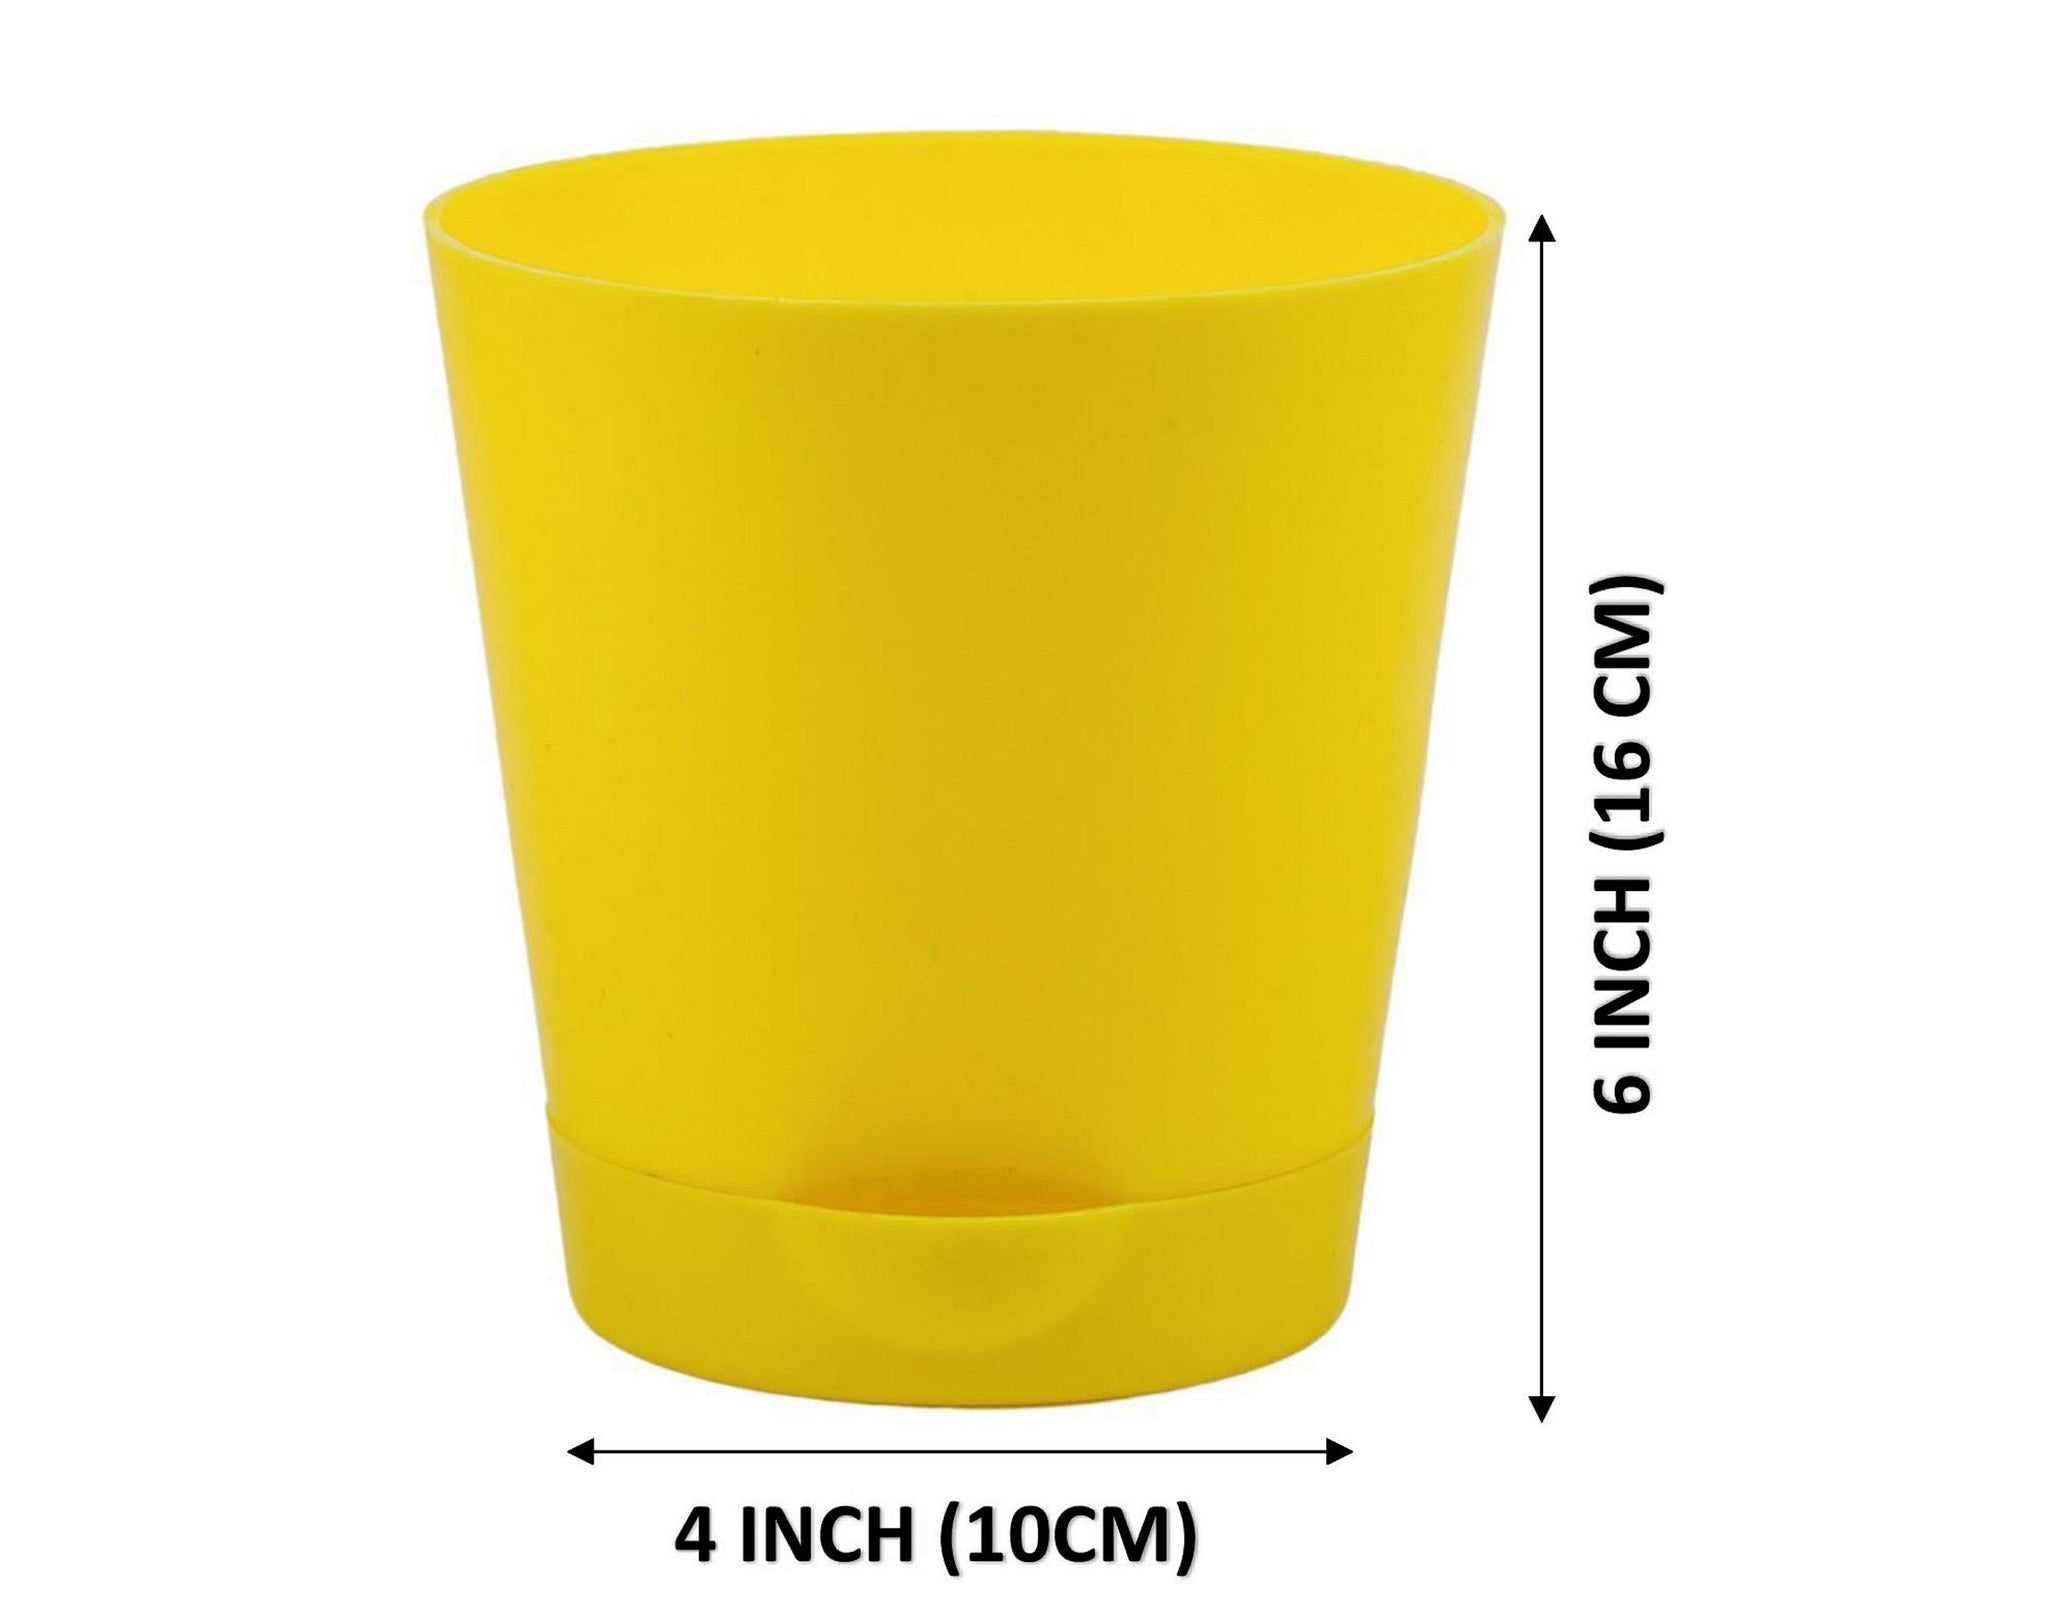 Utkarsh Super High-Quality|UV Treated|Durable Virgin Plastic Single-Color Self-Watering Round Flower|Plant Pots for Home Planters, Terrace, Garden, Balcony, Office, Restaurants |Multicolor|Home Indoor & Outdoor Garden Plants |4" Size